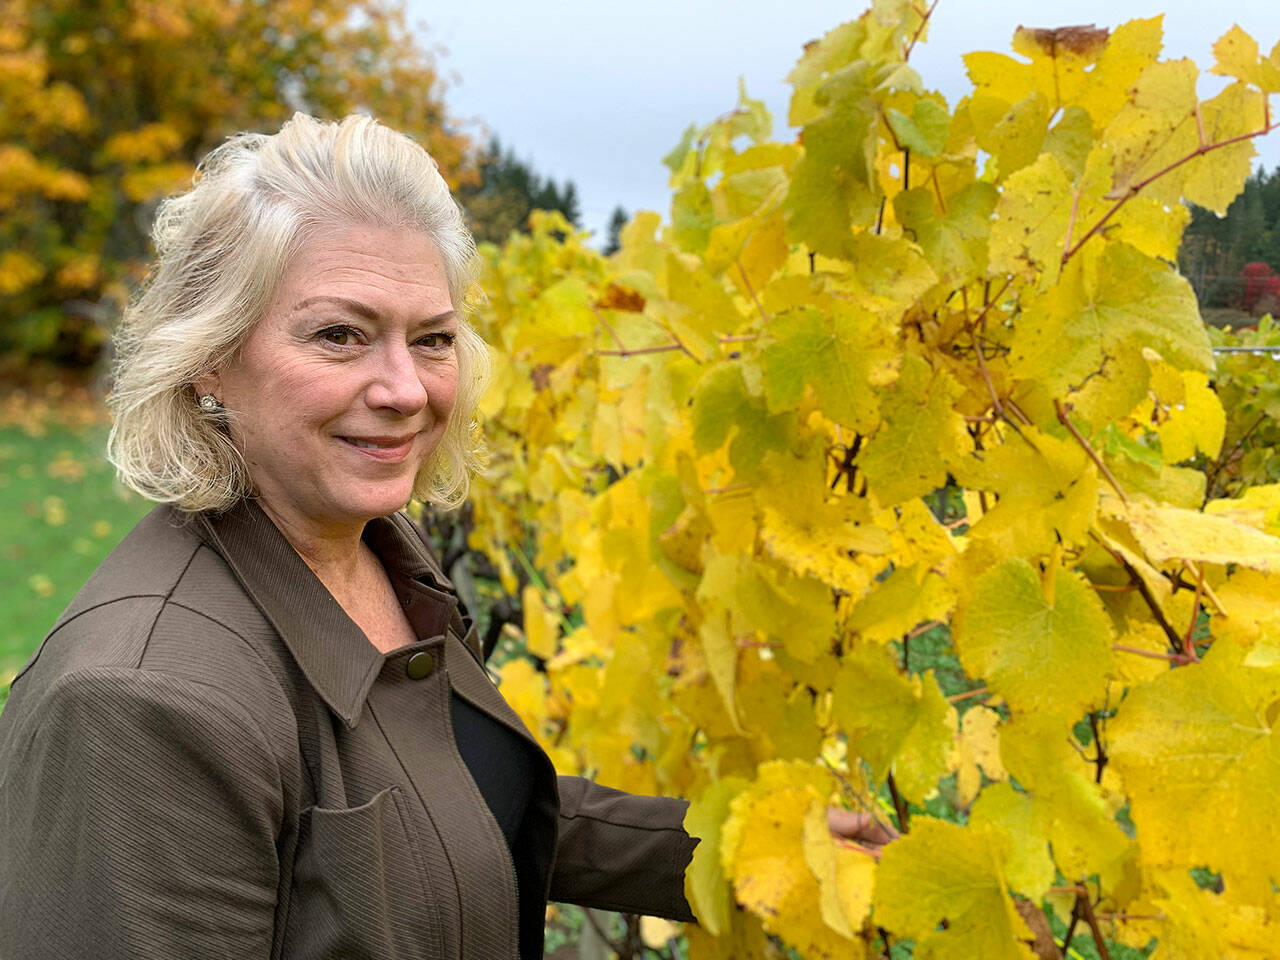 Mary Ellen Houston says she is an extrovert and loves interacting with people visiting the Olalla Vineyard and Winery’s tasting room. (Bob Smith | Kitsap Daily News)